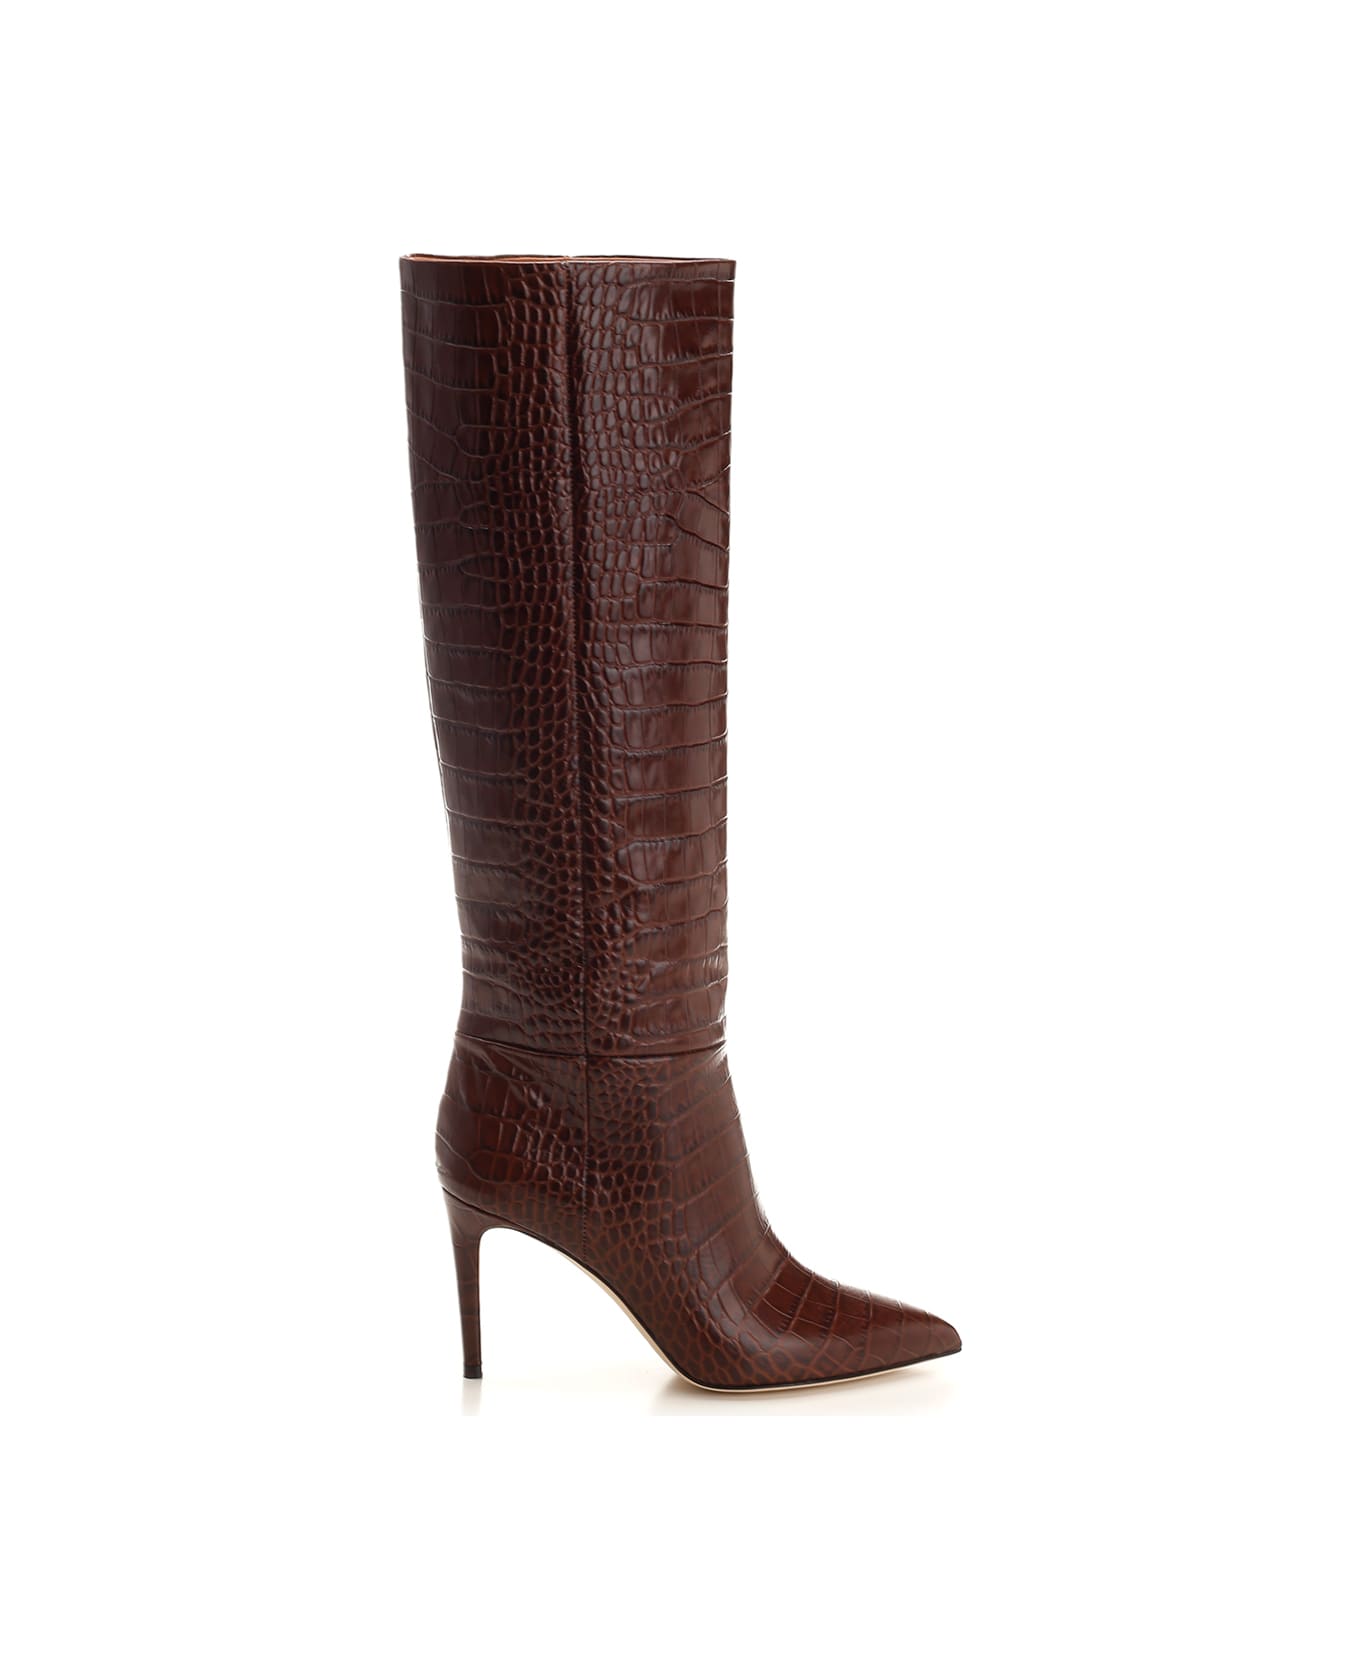 Paris Texas Embossed Leather Boots - BROWN